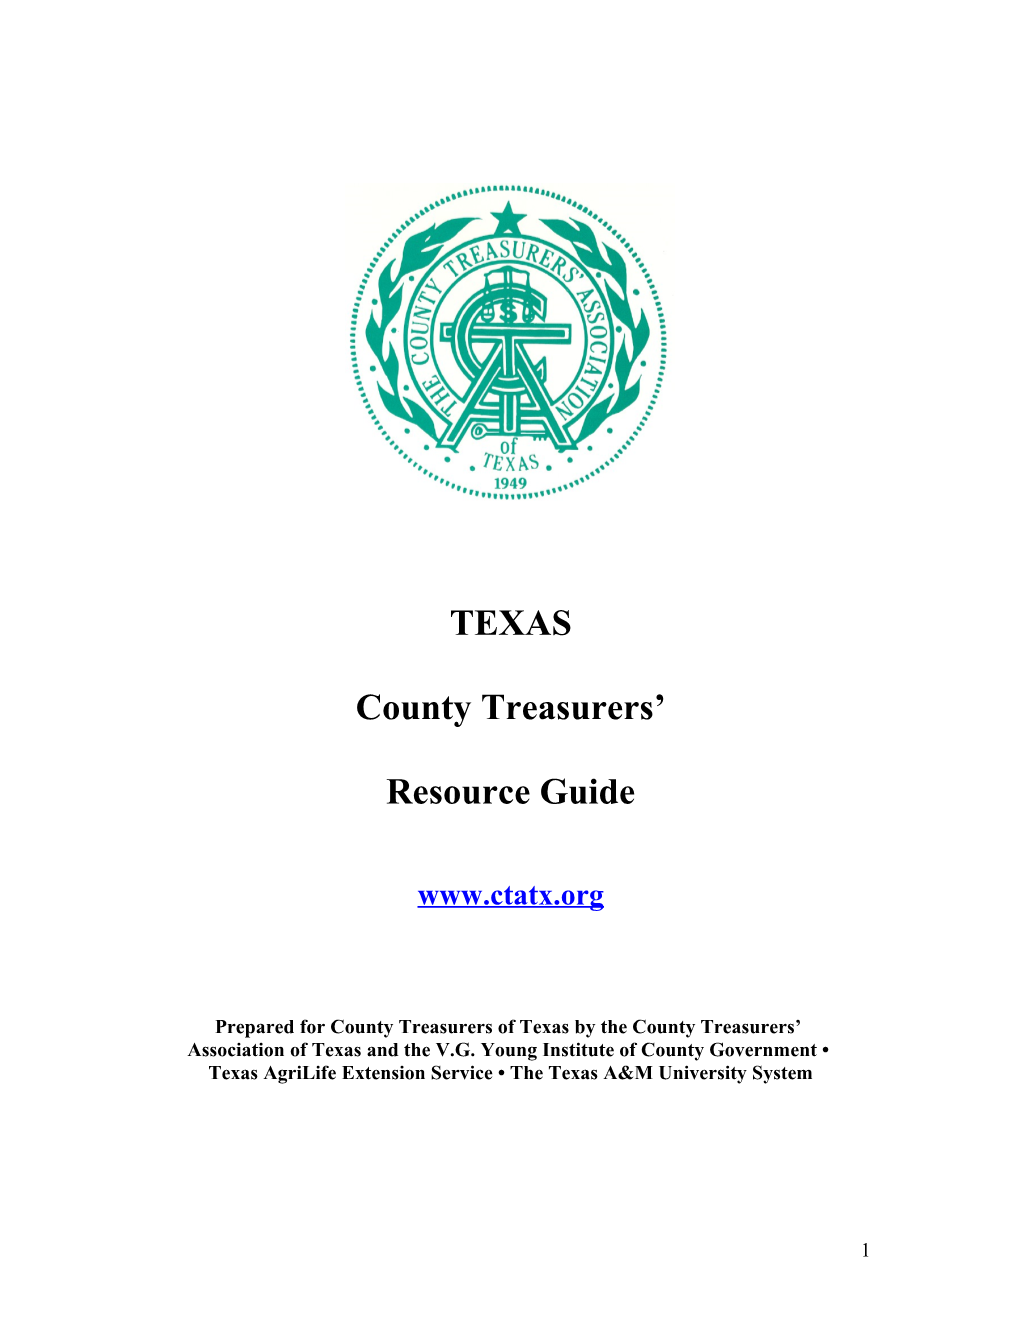 Prepared for County Treasurers of Texas by the County Treasurers